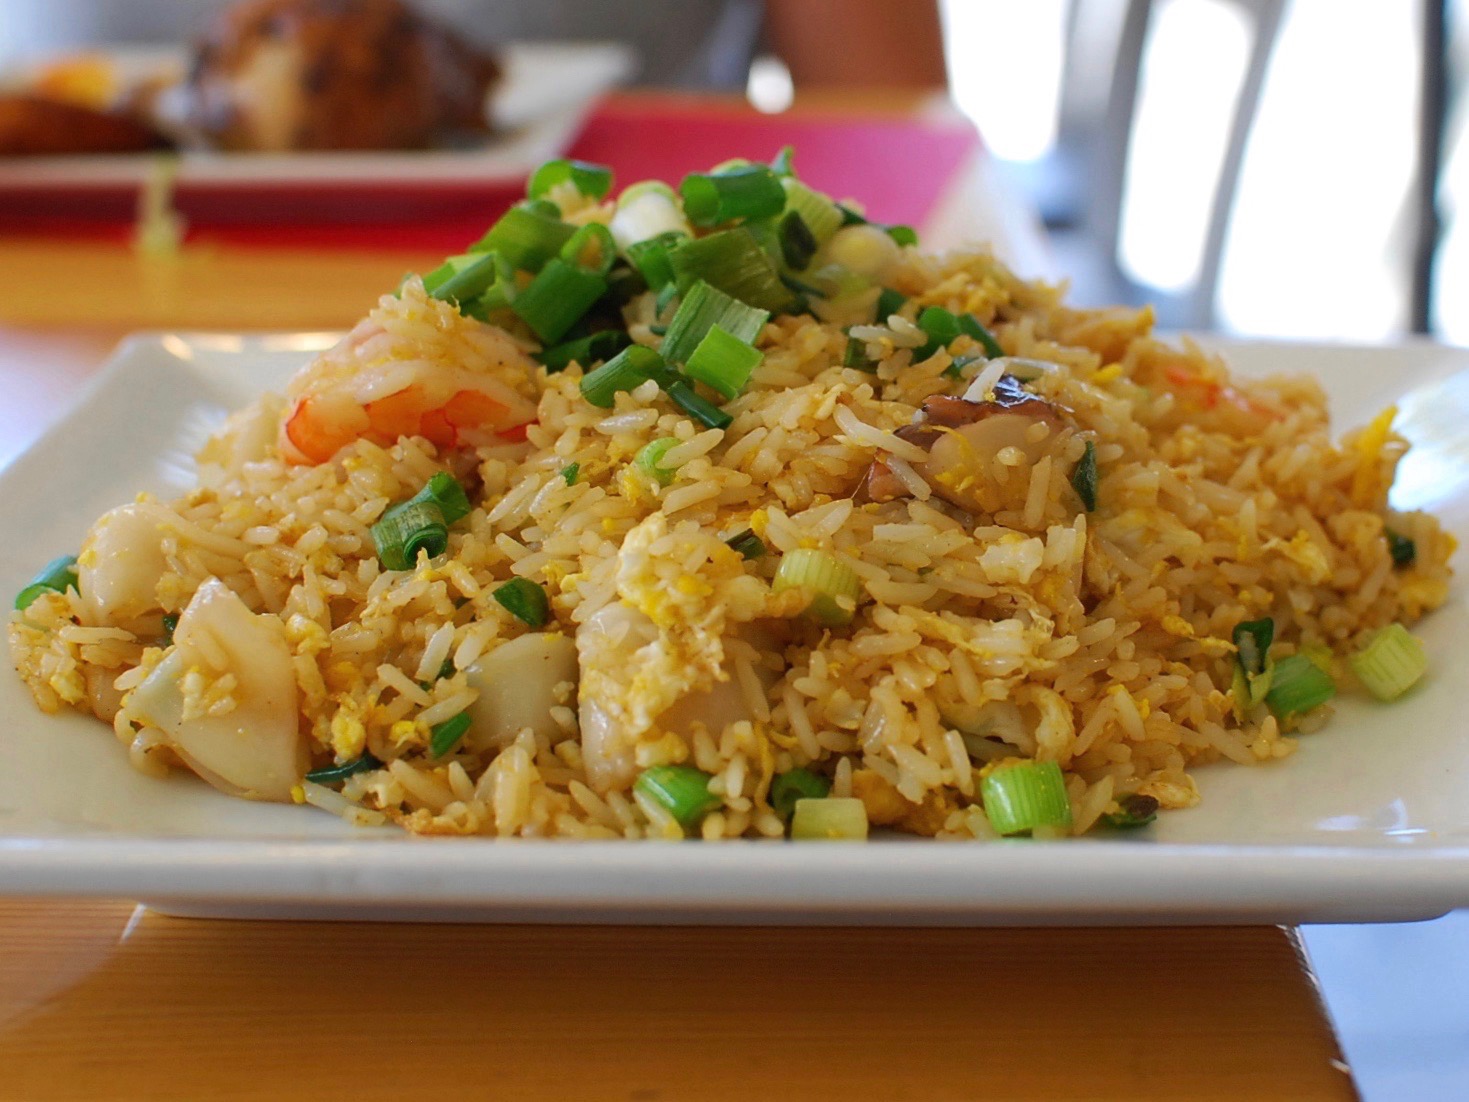 Peru has a sizable Chinese population, which translates to dishes like Arro...